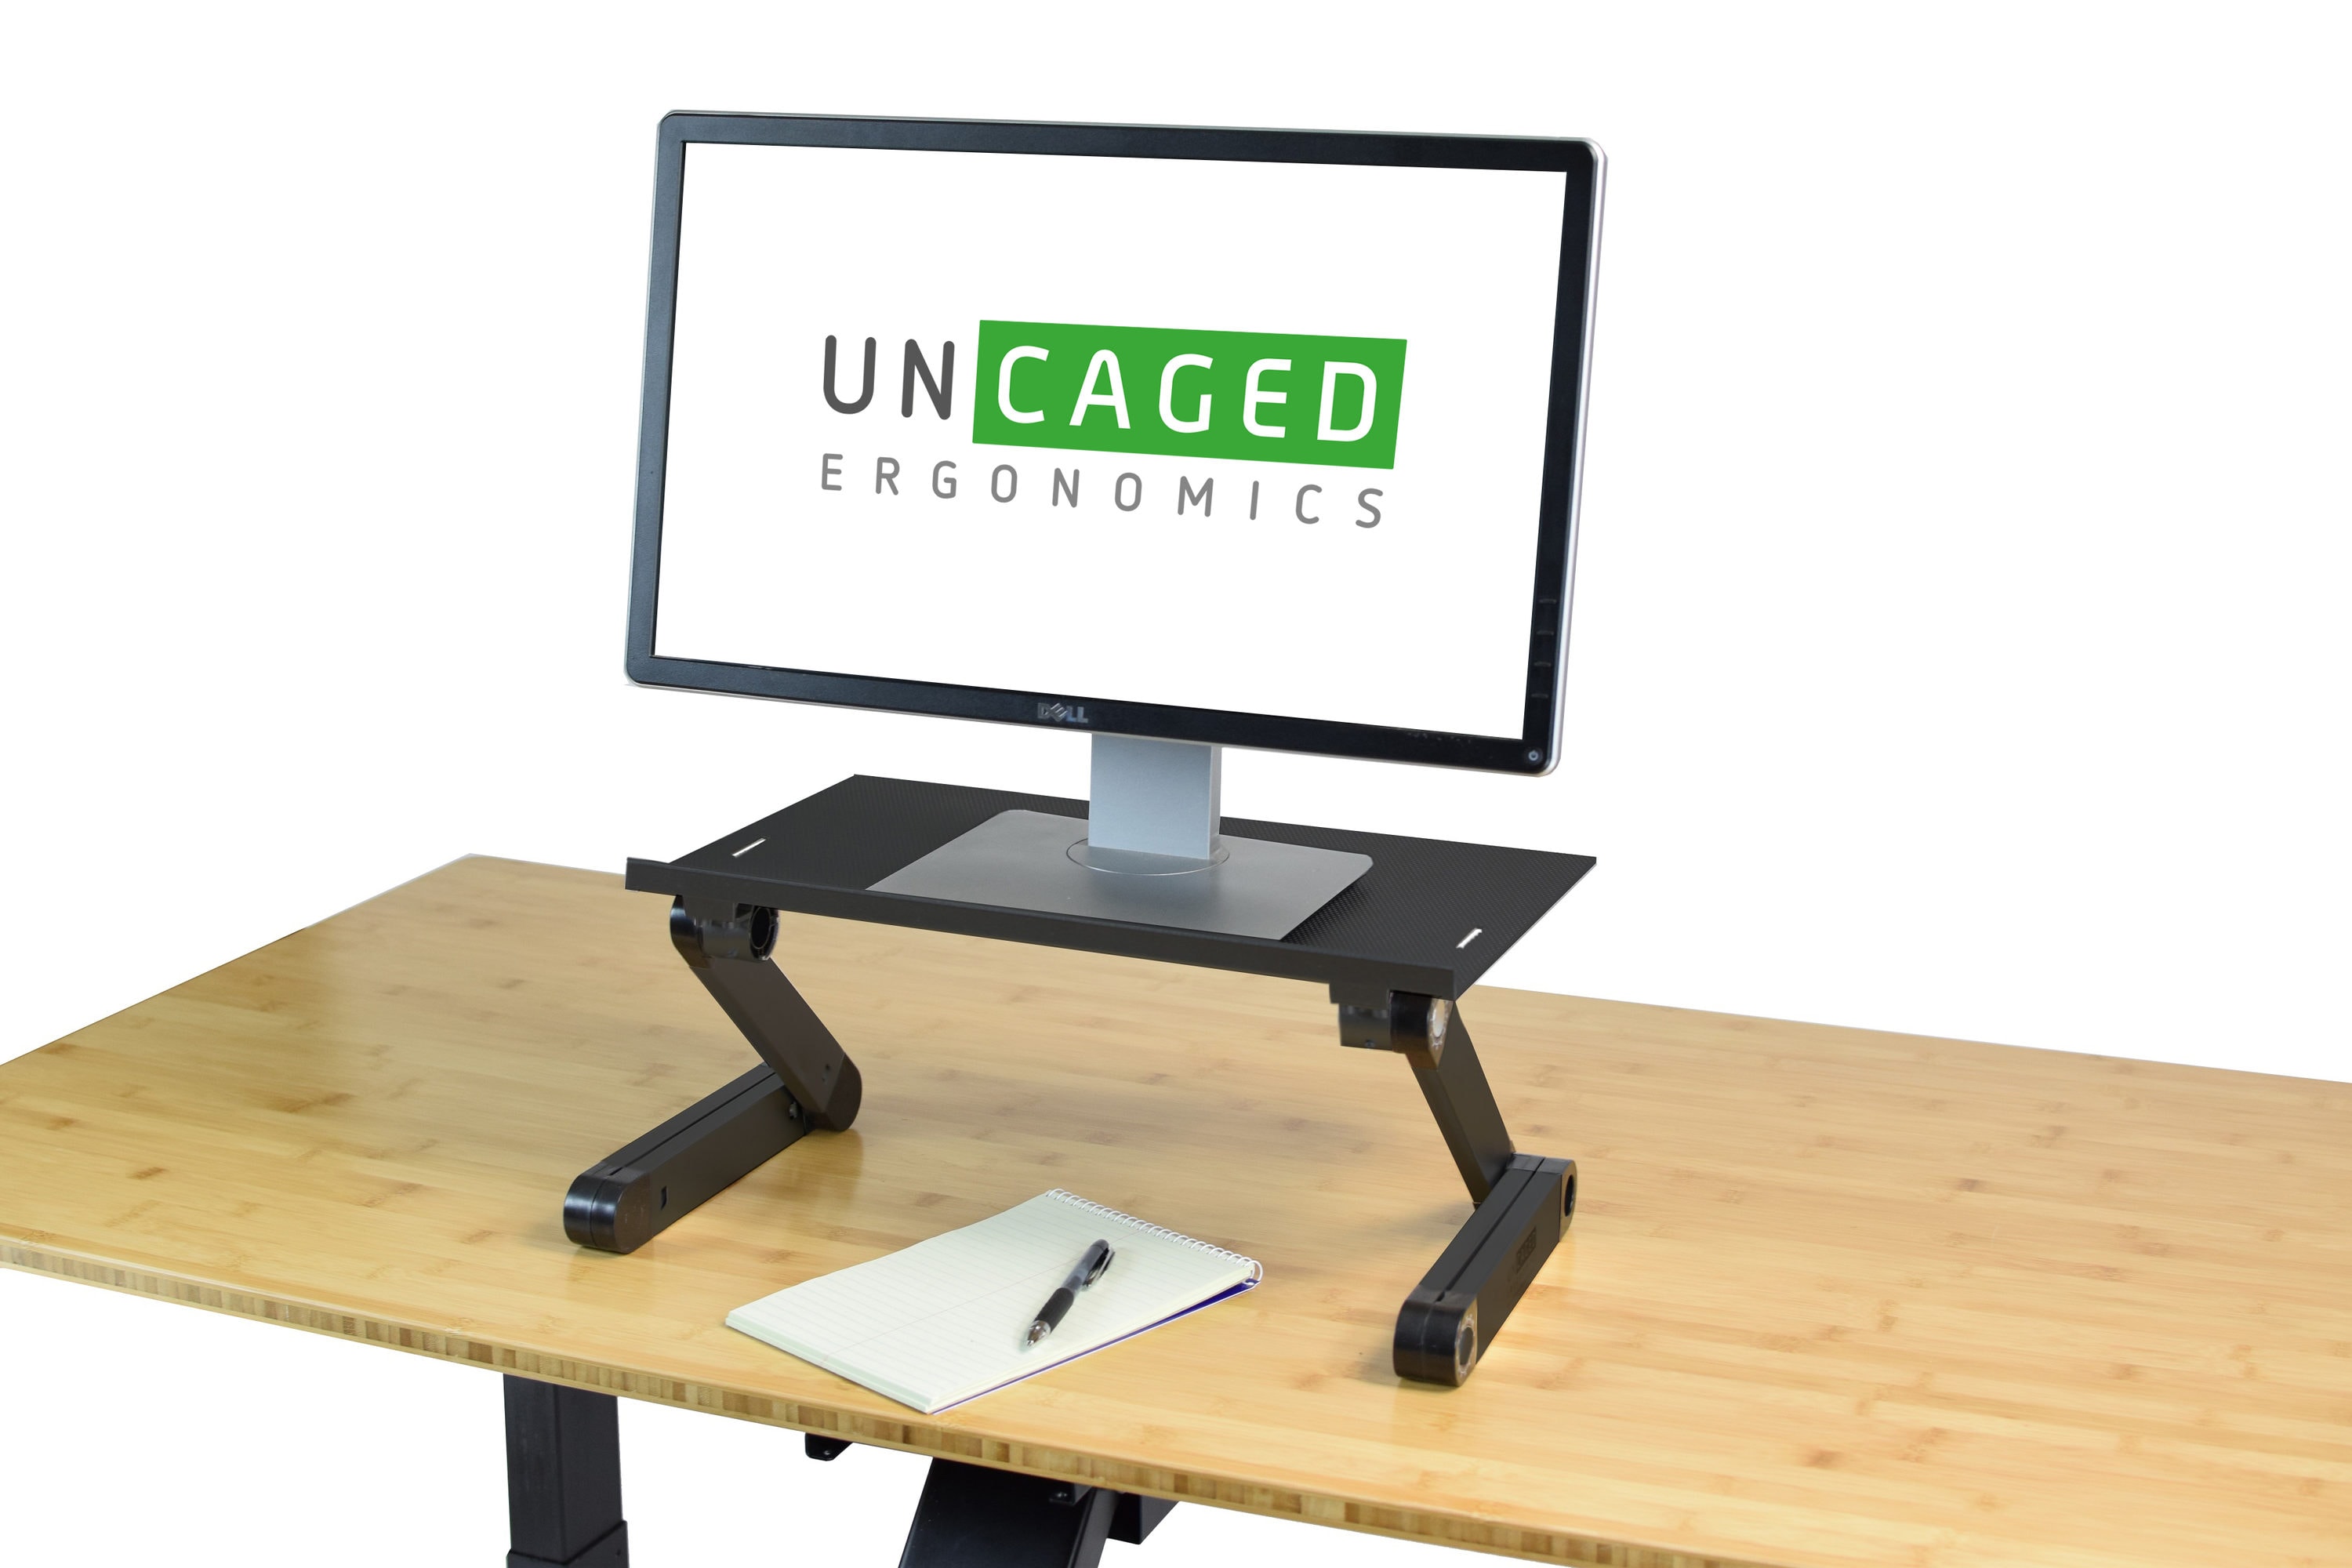 Monitor Arms - Ergonomic and Adjustable